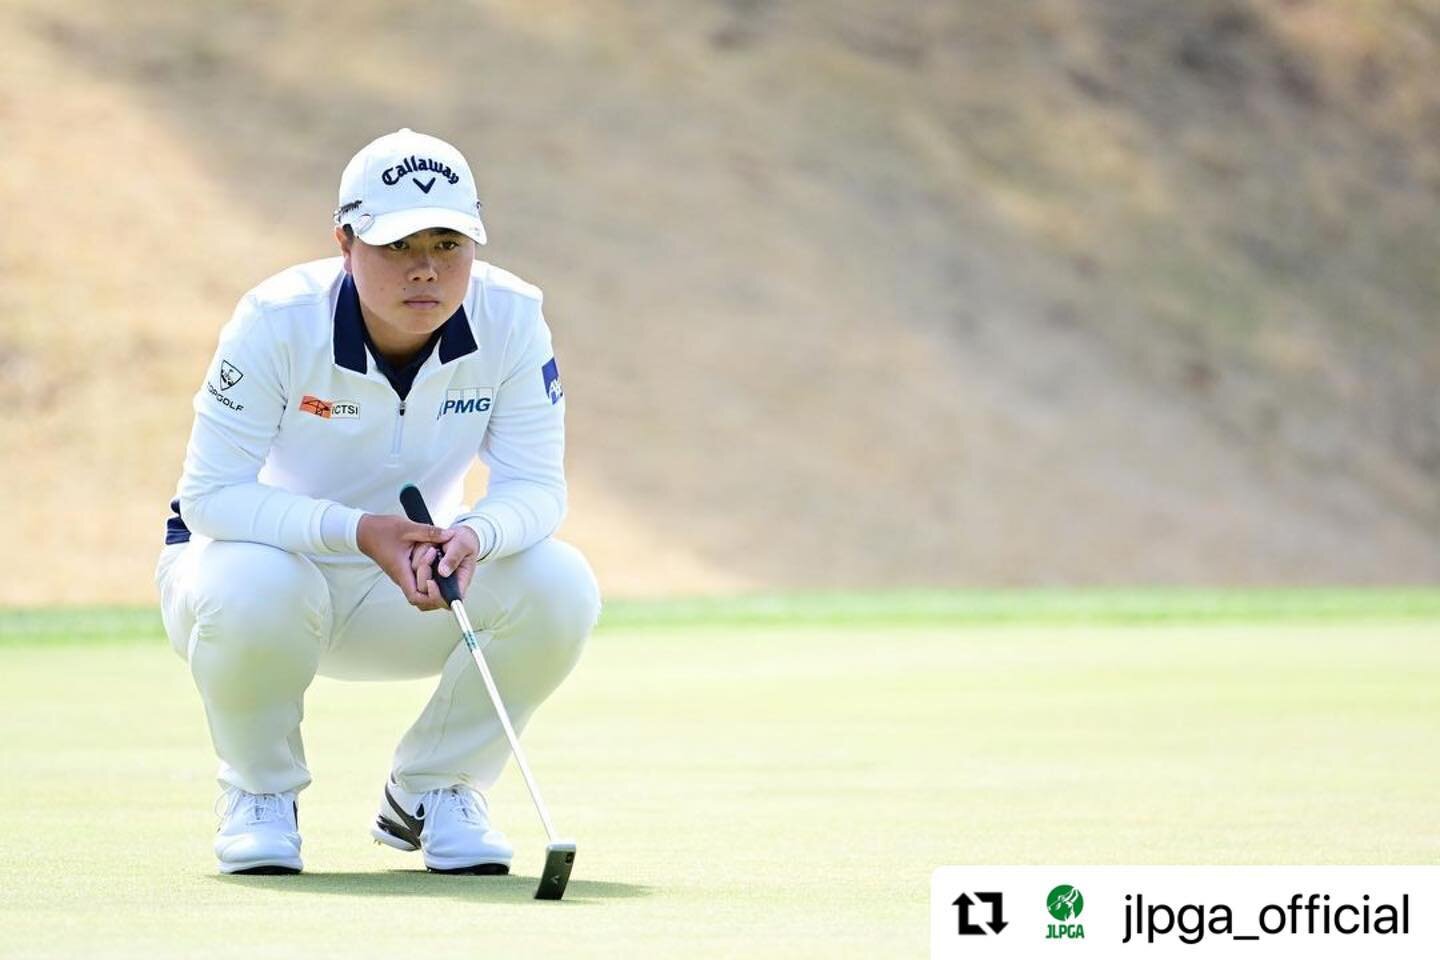 Congratulations to Yuka Saso for her 2nd place finish at the JLPGA&rsquo;s @tpoint_eneos_golf this weekend 🥈

#Repost @jlpga_official